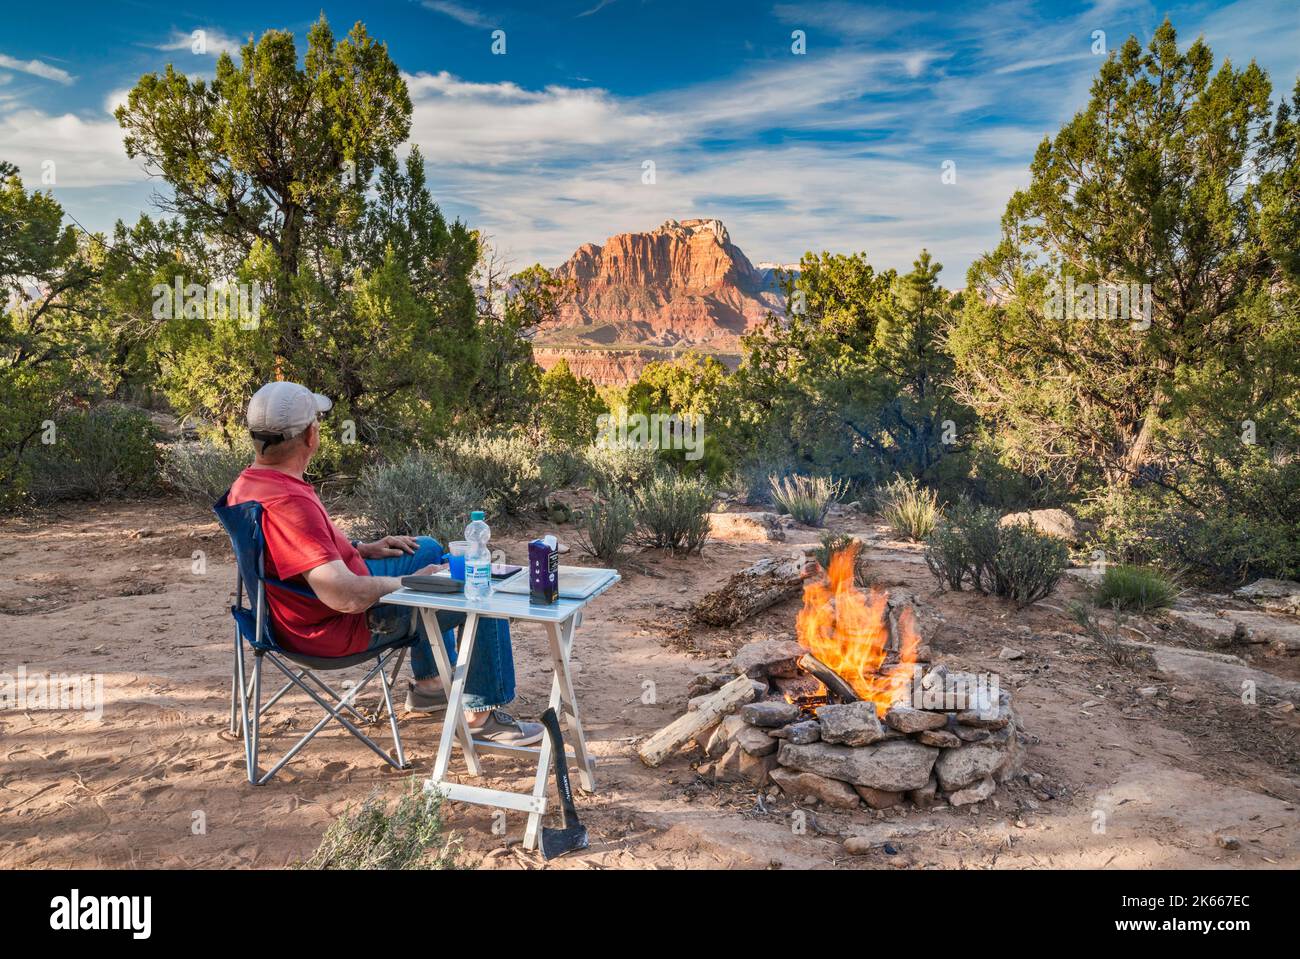 Man at camp fire at sunset, in pinyon juniper forest off Smithsonian Butte Road, Canaan Mtn Wilderness, Mount Kinesava in Zion Natl Park in dist, Utah Stock Photo